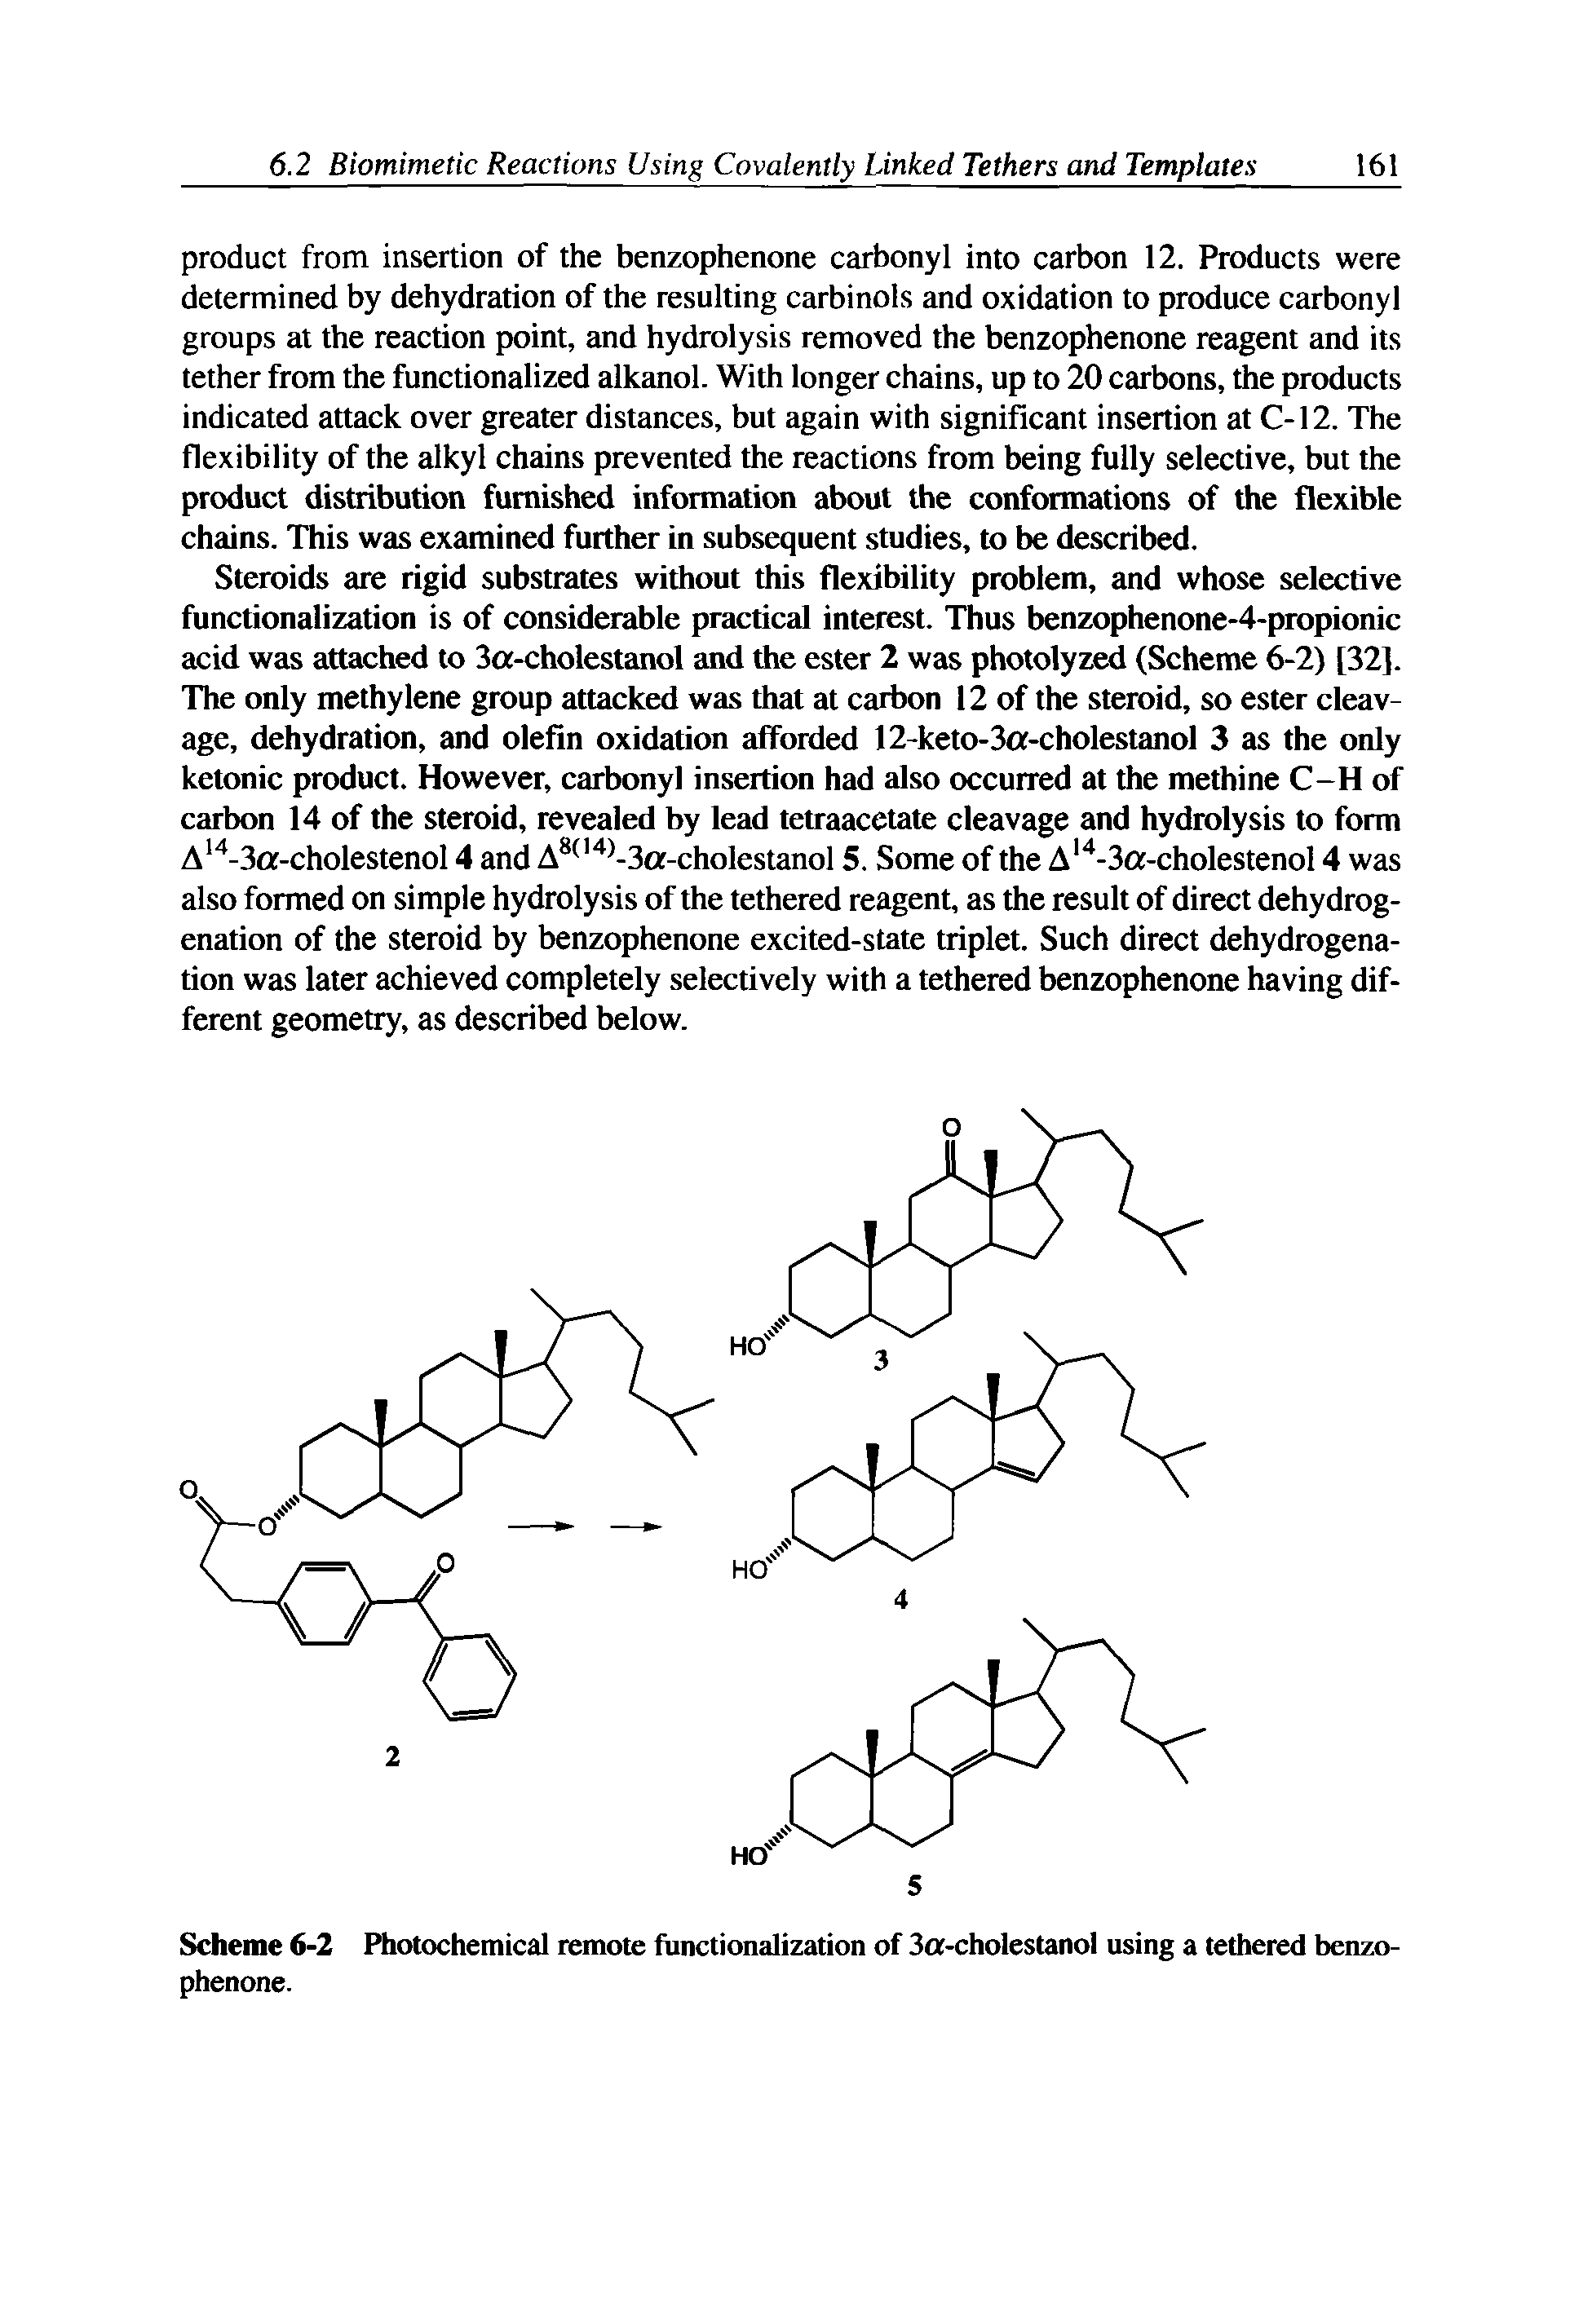 Scheme 6-2 Photochemical remote functionalization of 3a-cholestanol using a tethered benzophenone.